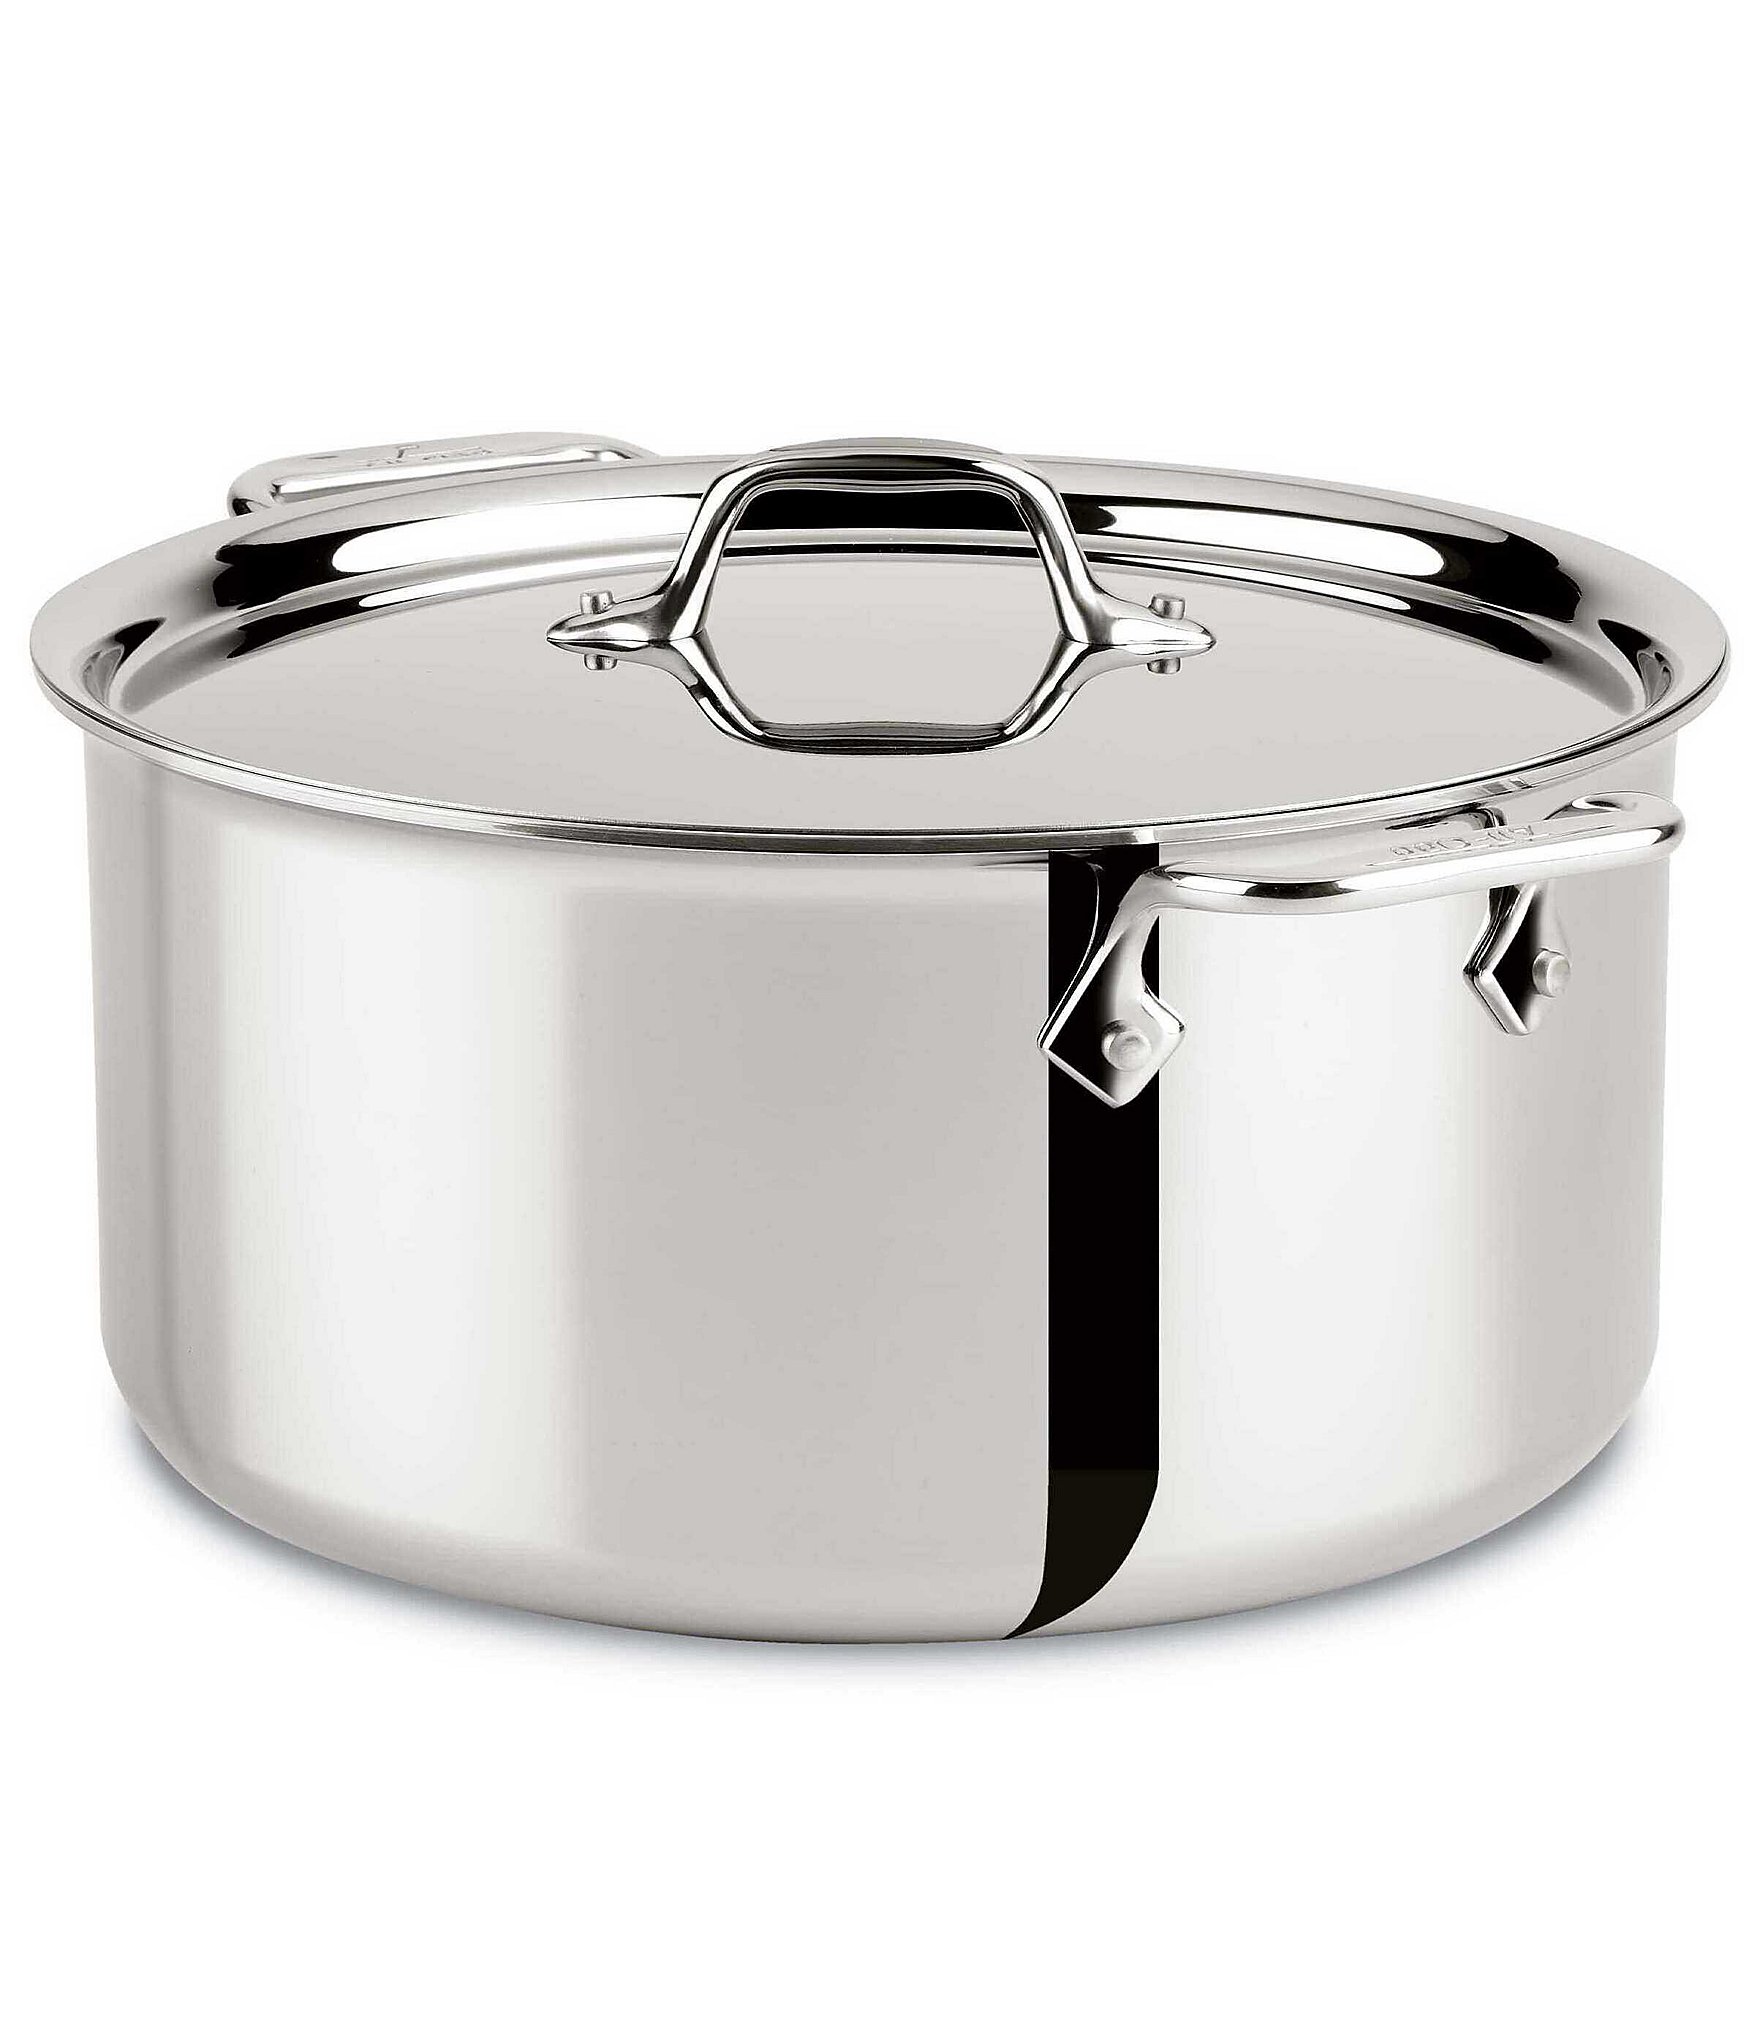 All-Clad D3 Stainless Steel 3-Ply Bonded Cookware 8-Quart Stockpot with All-clad 8 Qt. Stockpot With Lid Stainless Steel